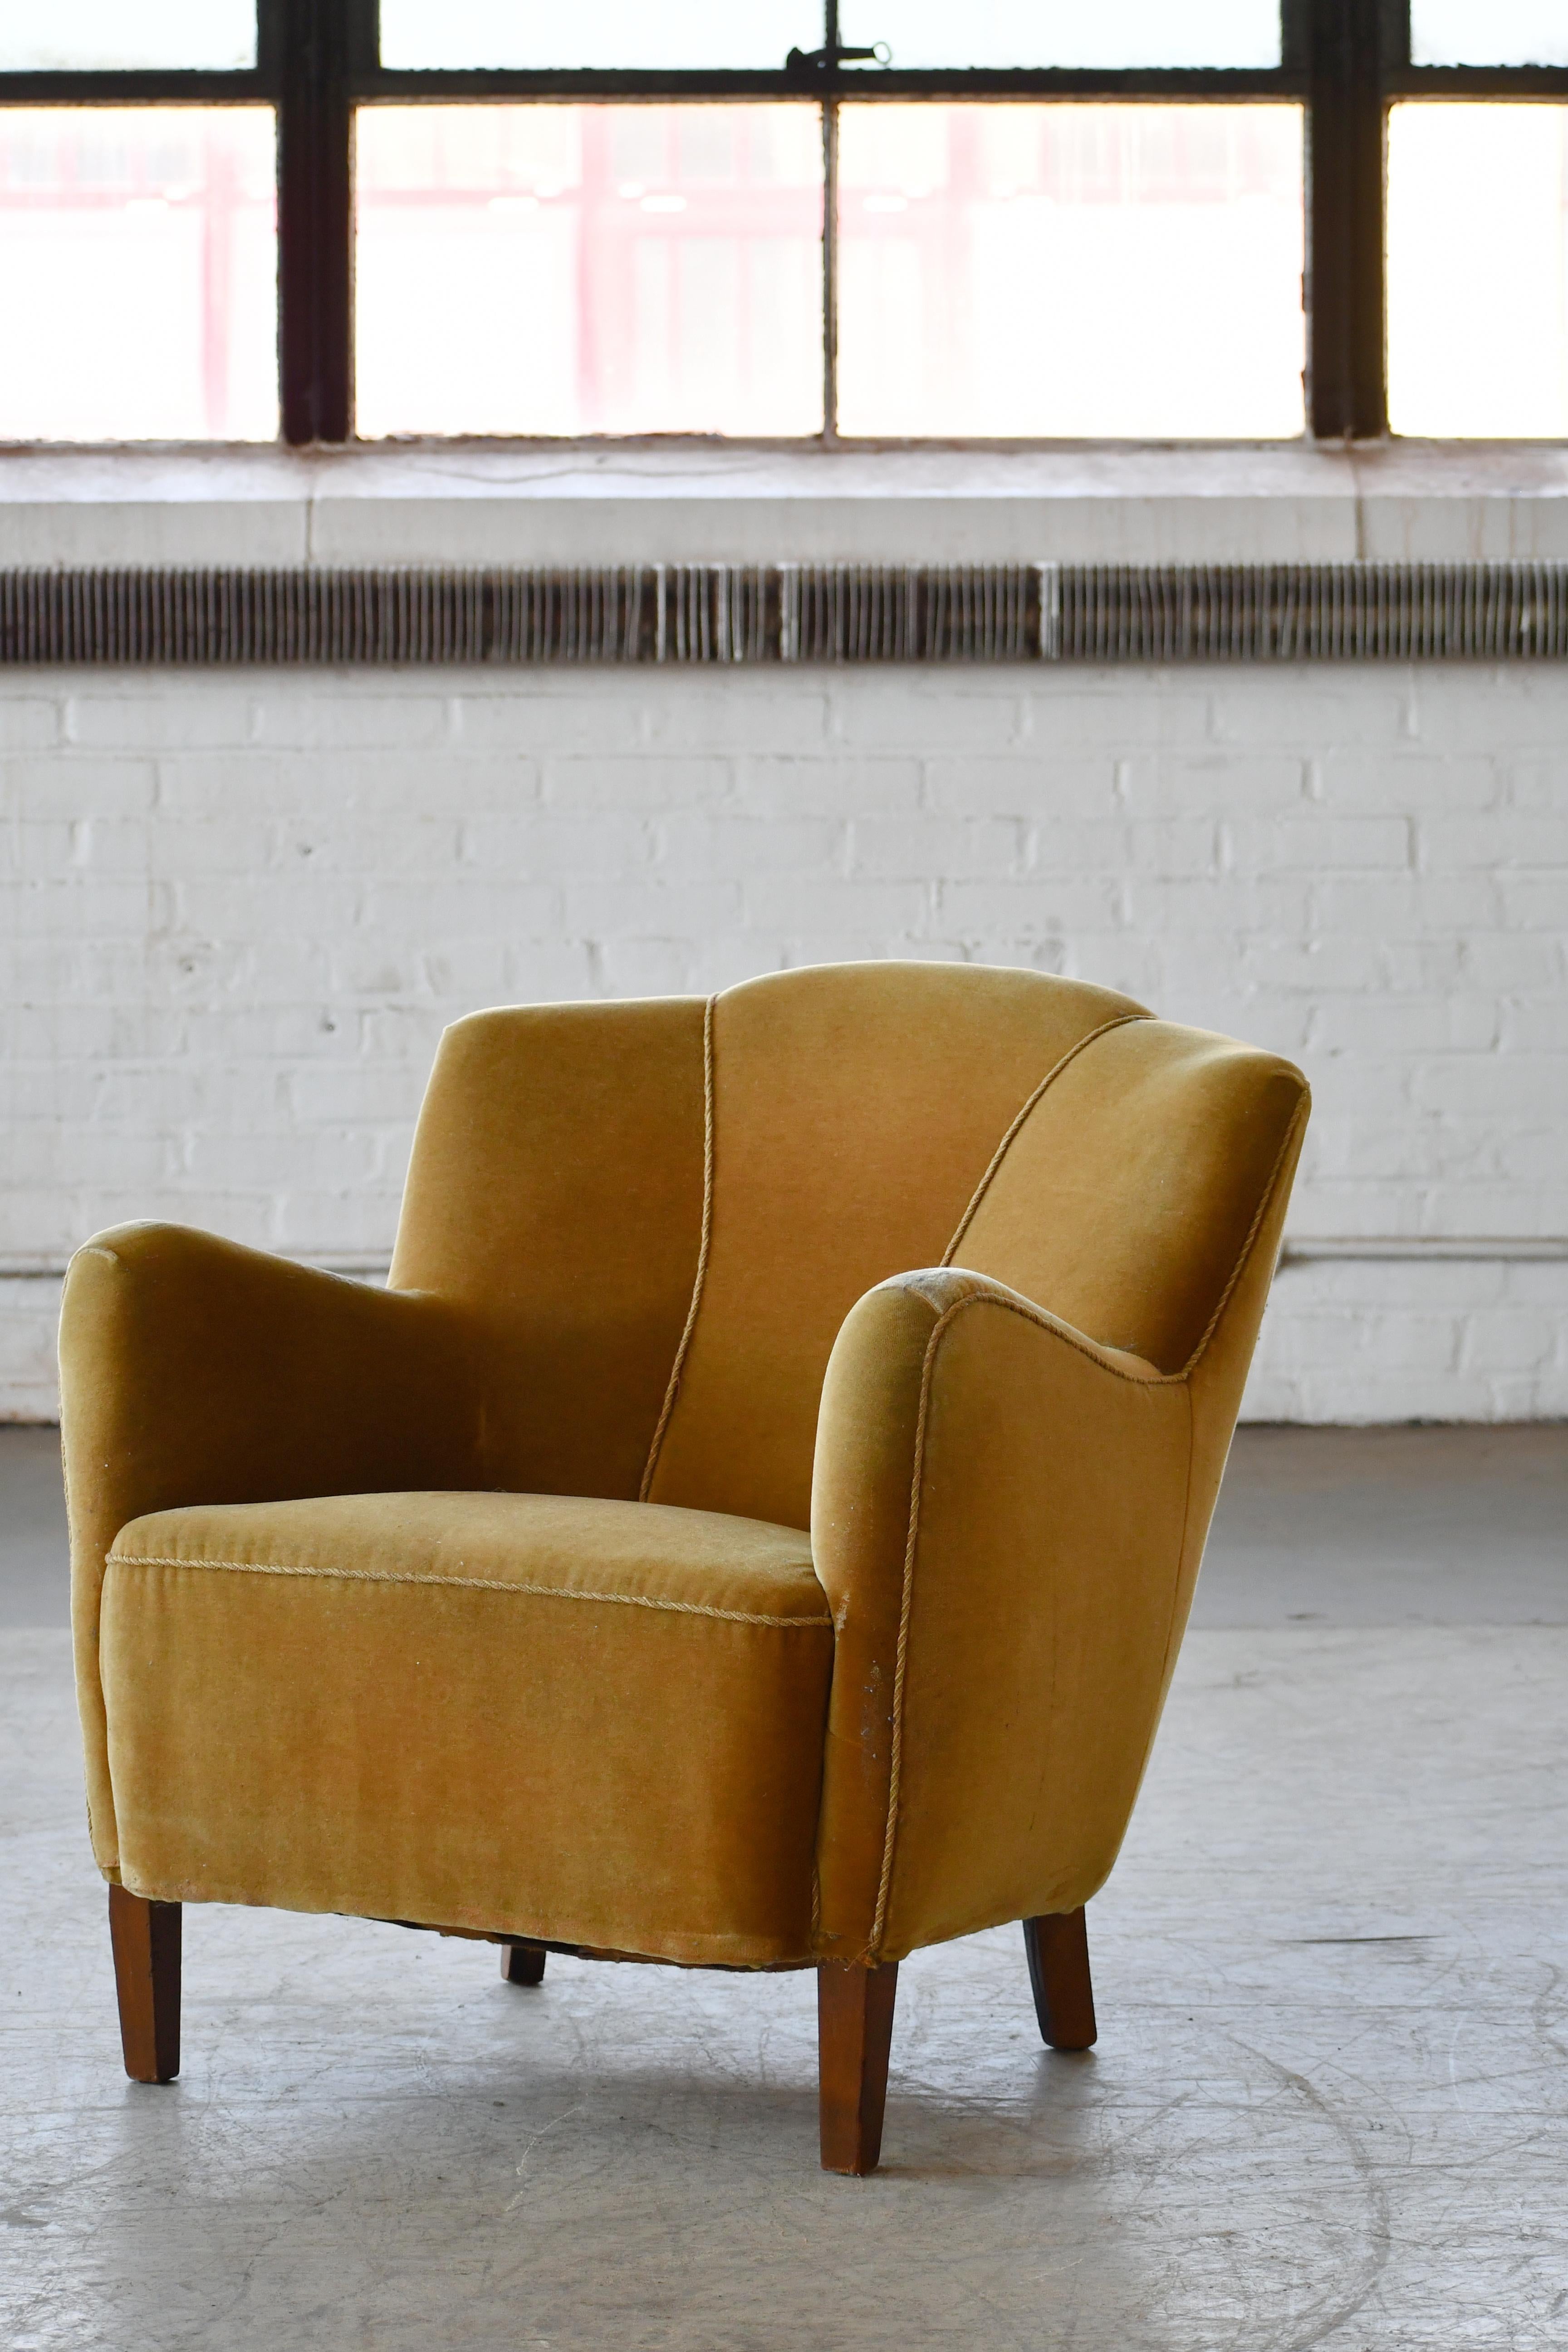 Mid-20th Century Danish 1940s Low Easy Chair in Yellow Mohair